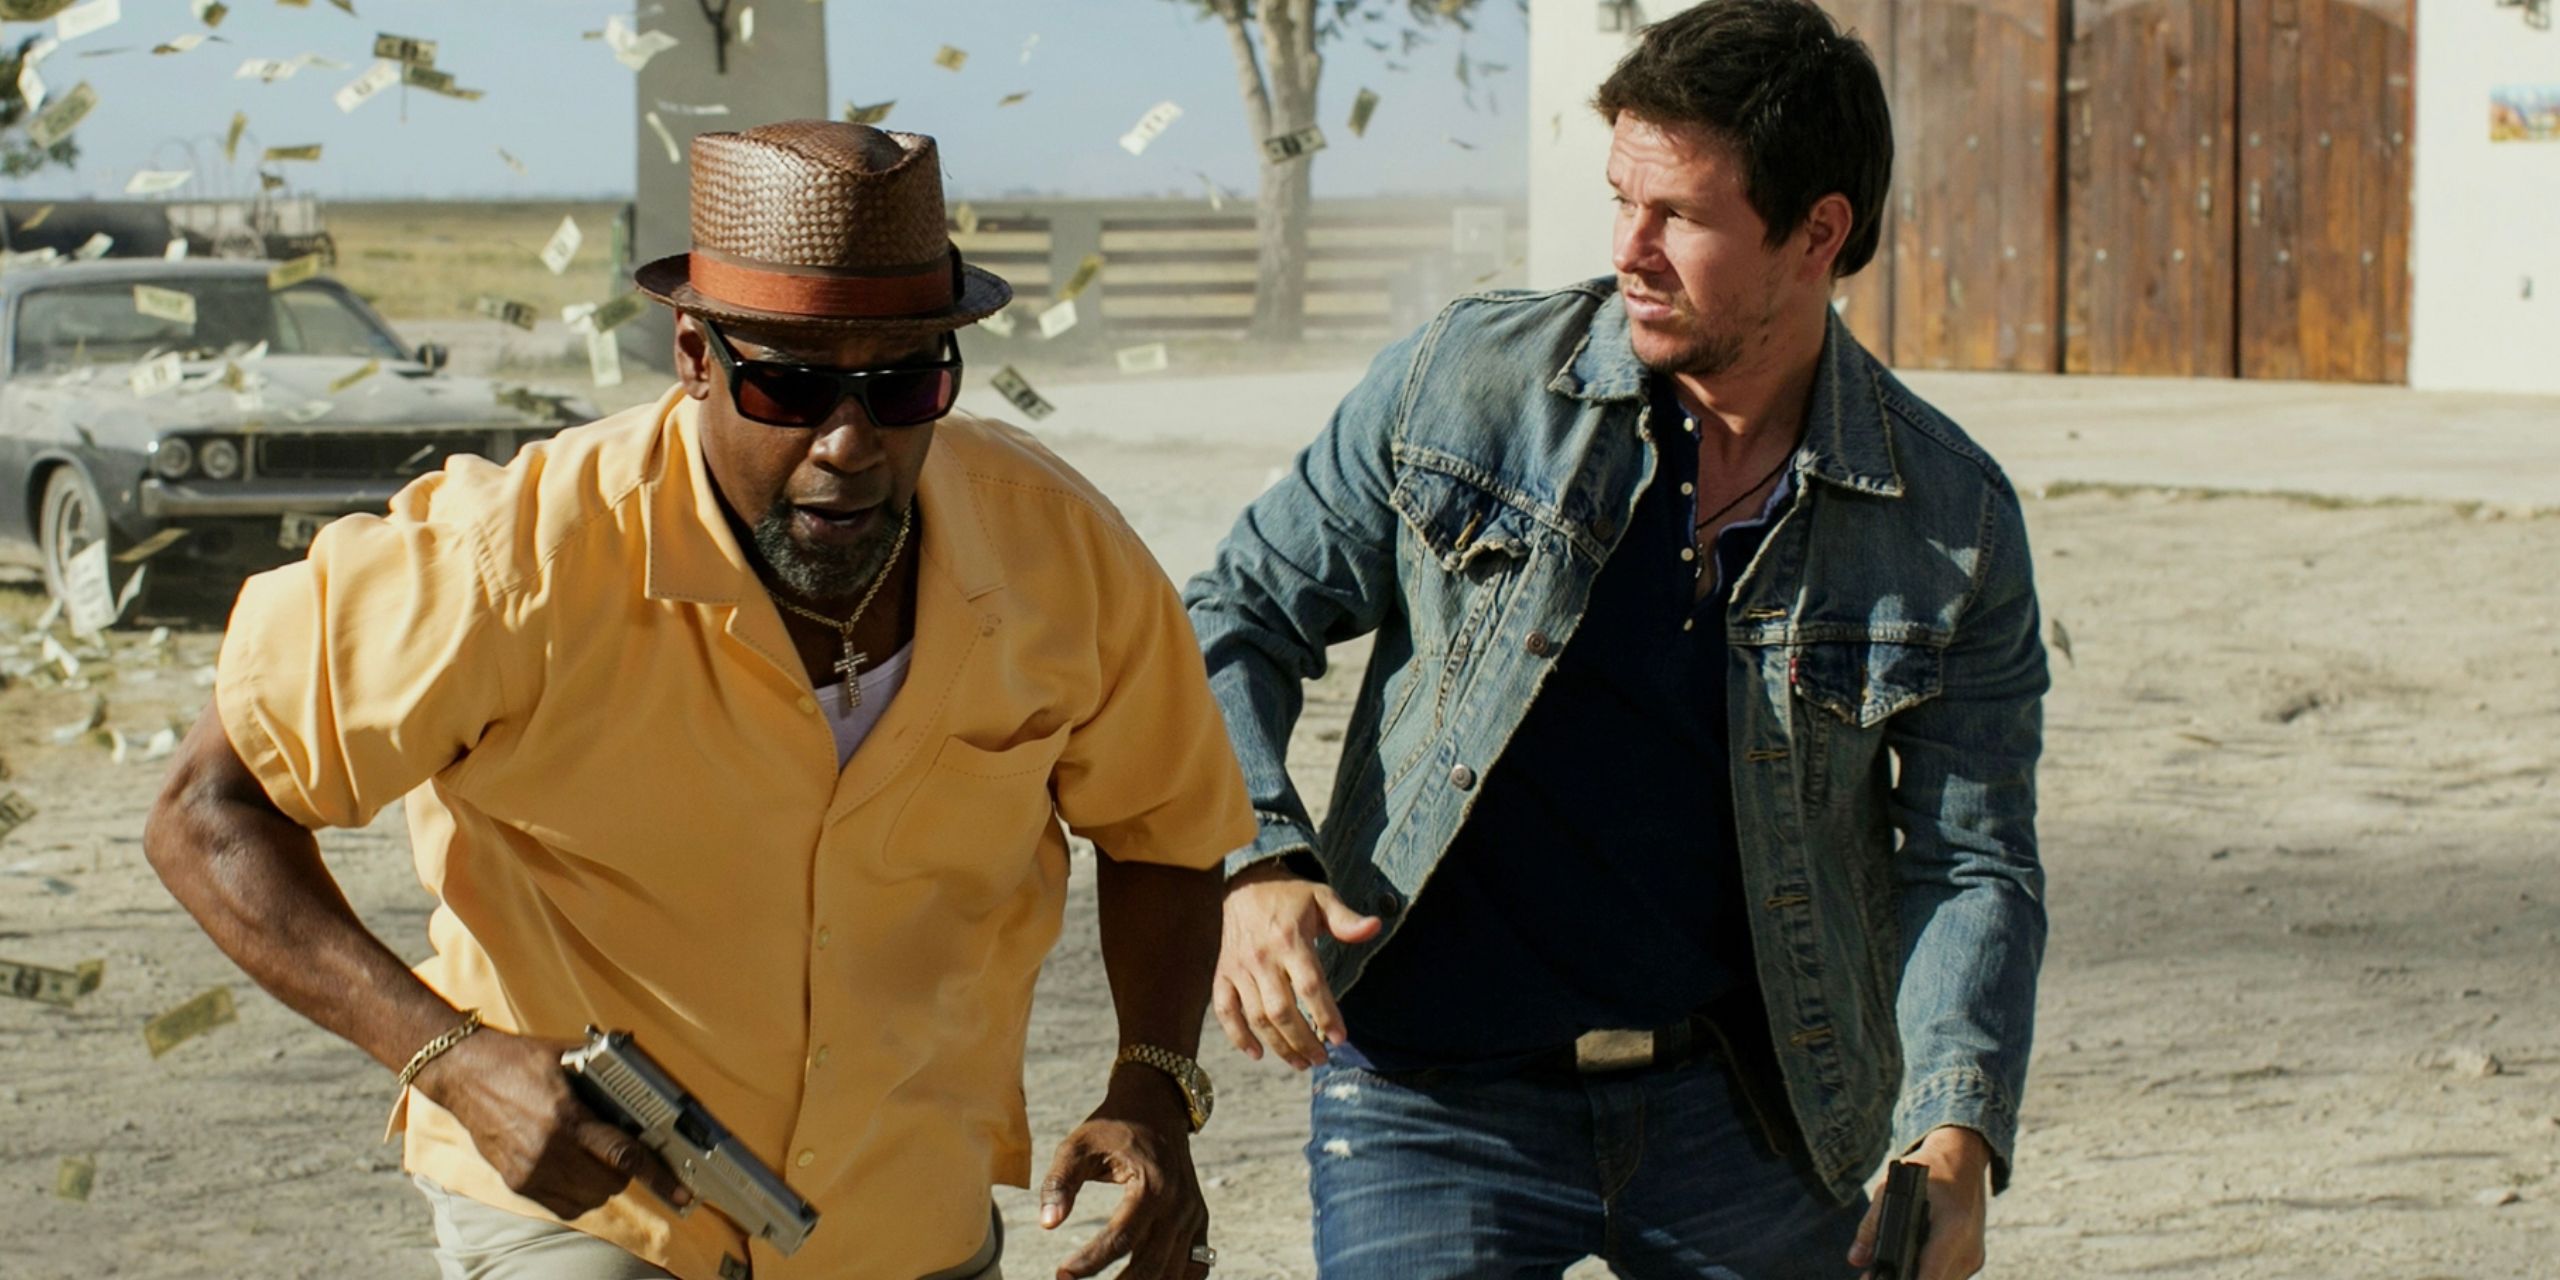 Denzel Washington and Mark Wahlberg running with guns in their hands and money flying behind them in the movie 2 Guns